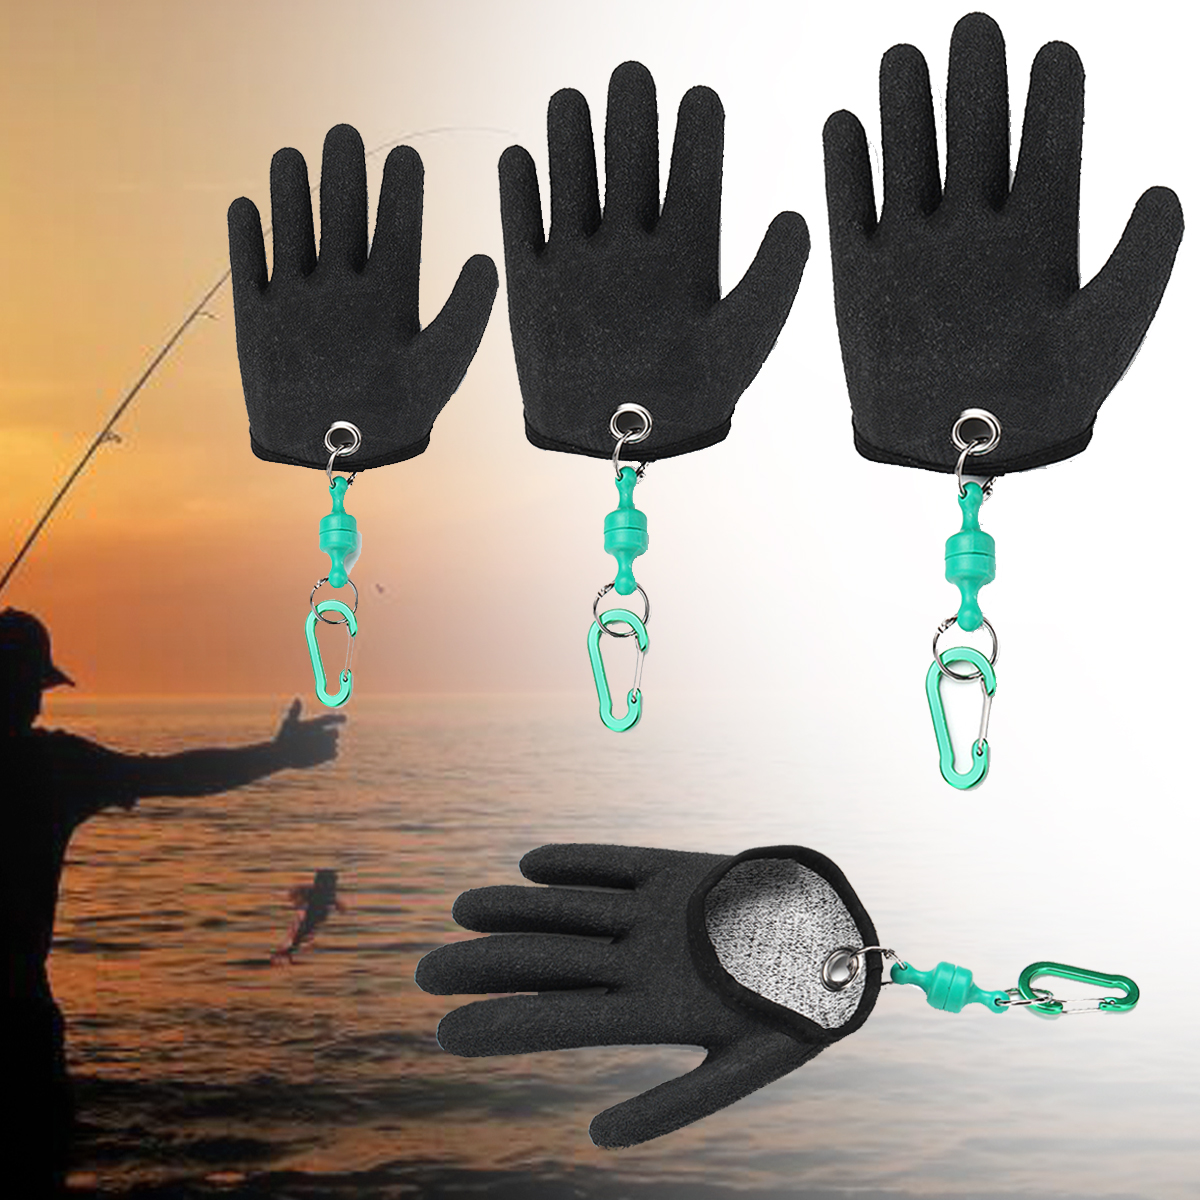 

1 Pcs Fishing Glove Safety Magnet Release Keychain Fishing Right Hand Protection Gloves